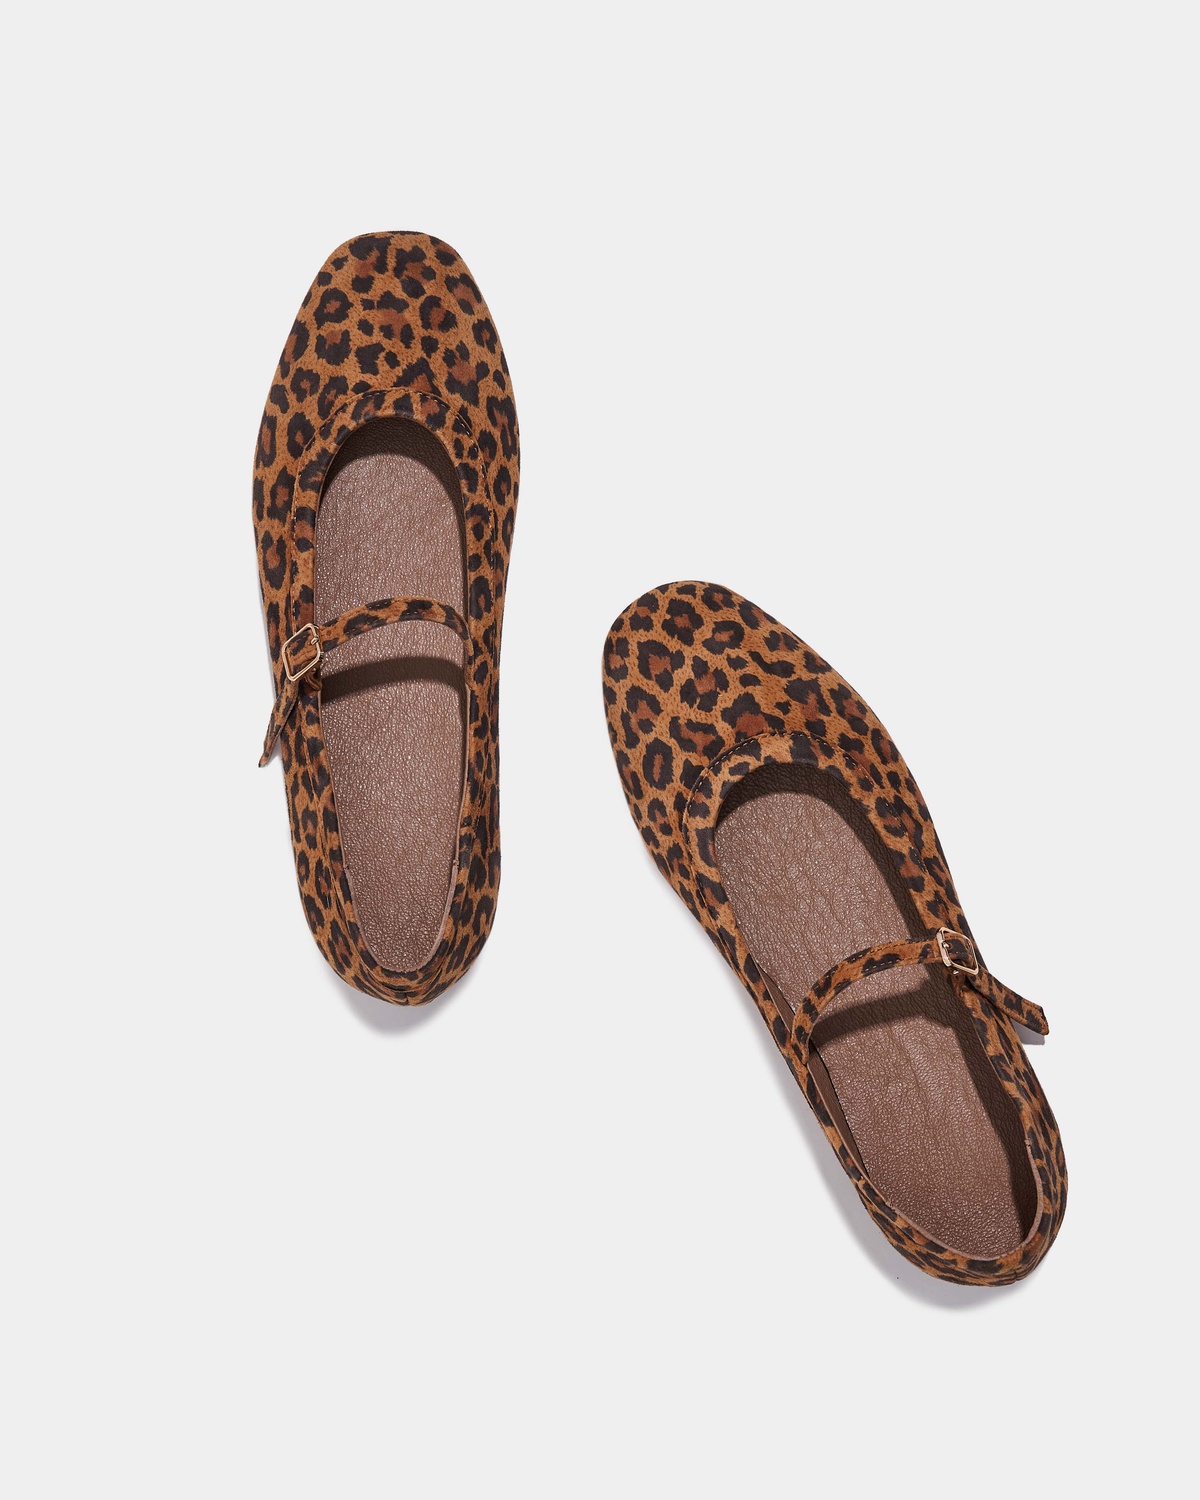 Leopard Ballet Flats with the Strap